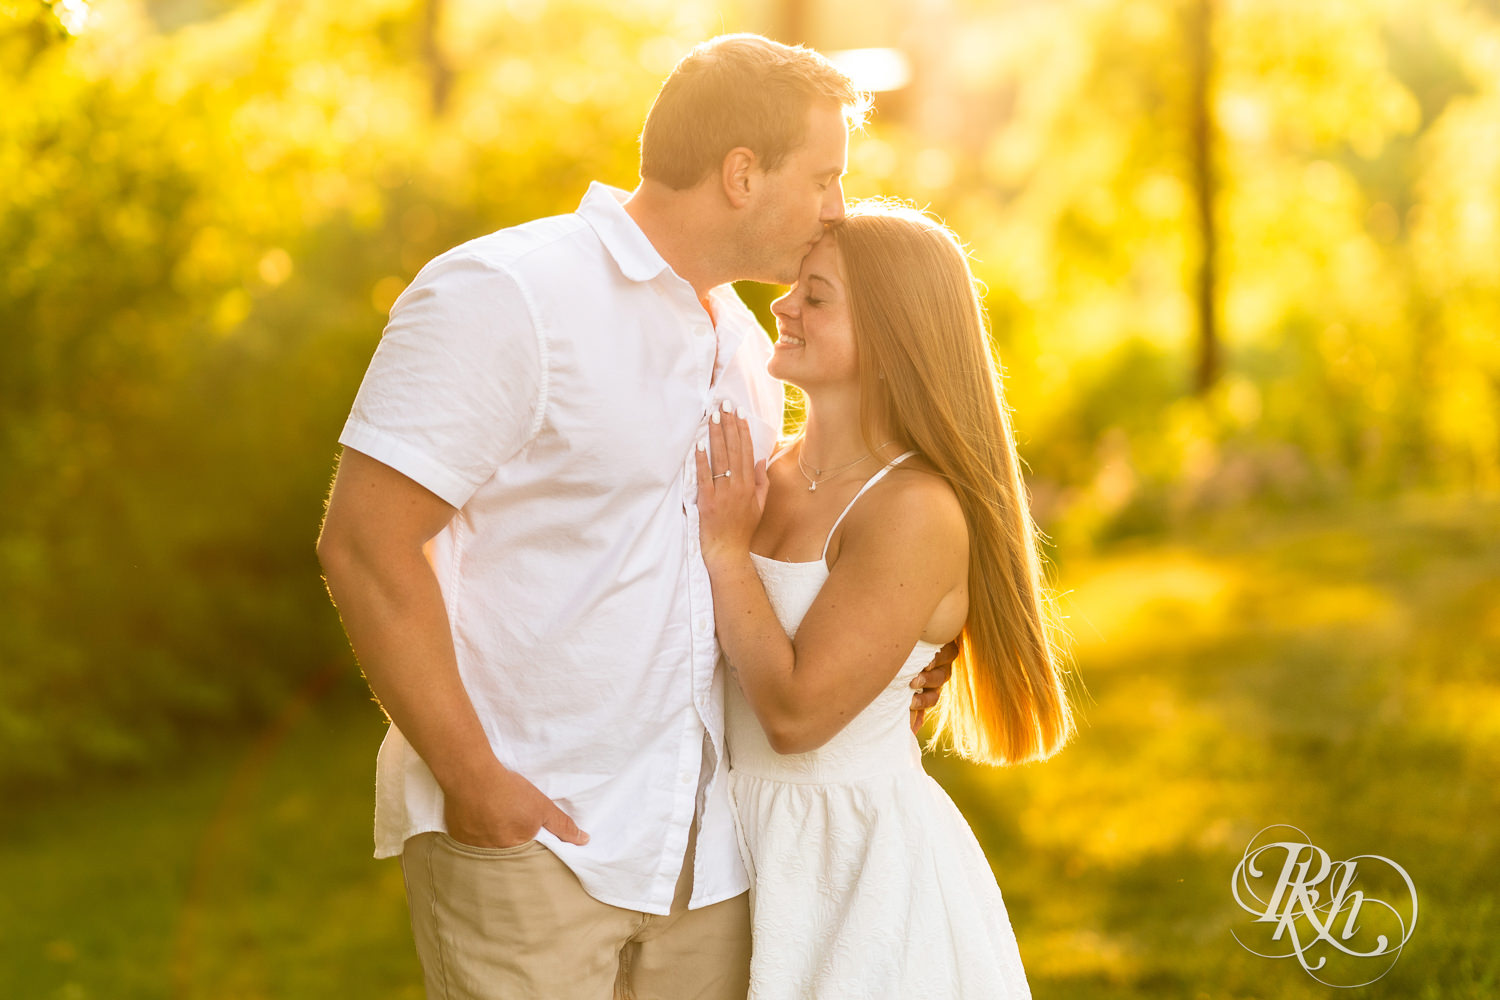 Man in white shirt and woman in white dress smile during golden hour engagement photography at Lebanon Hills in Eagan, Minnesota.